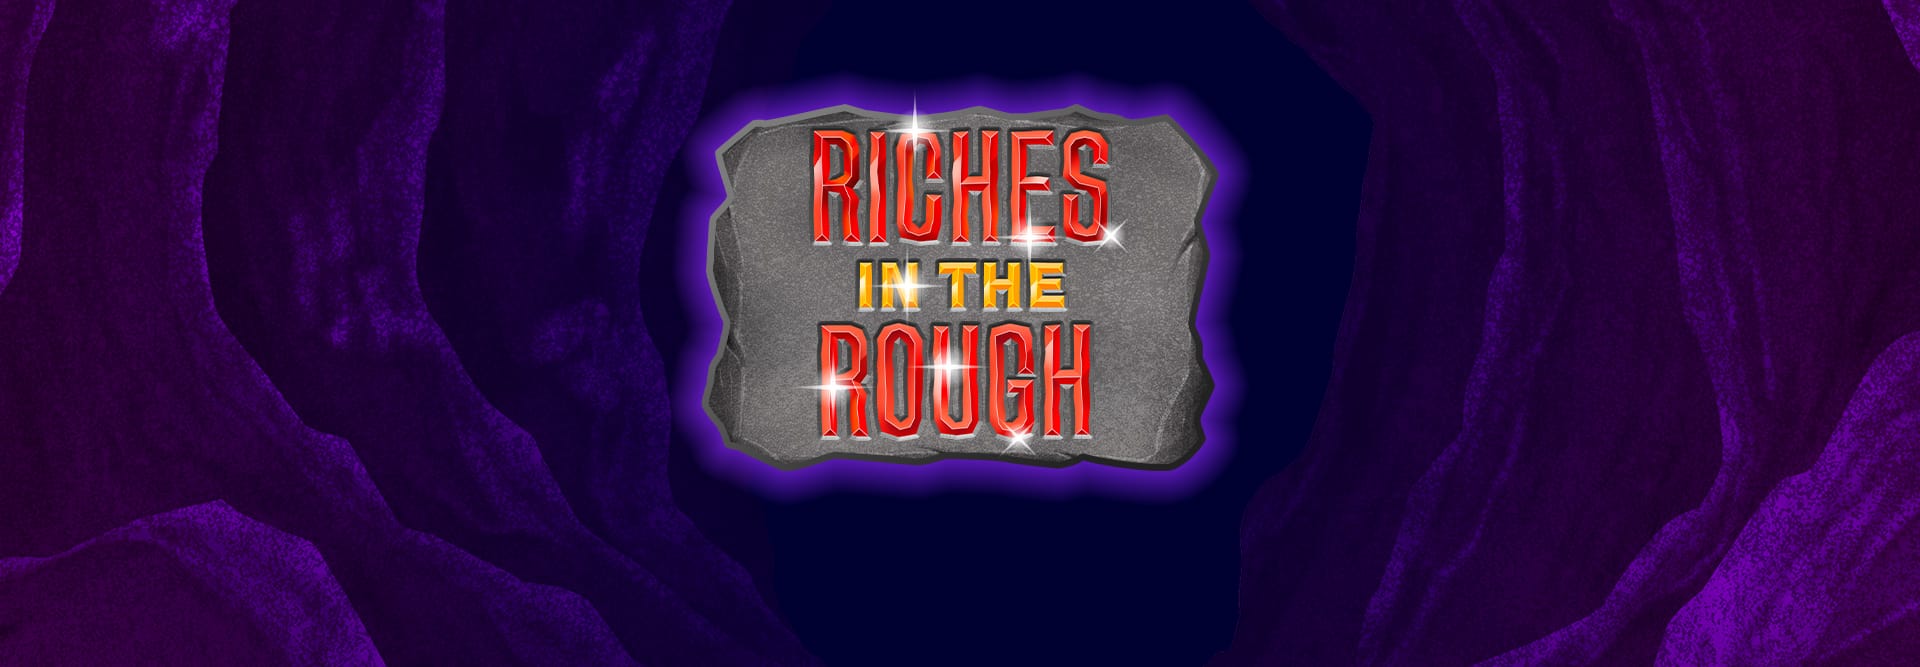 Riches in the Rough Online Slot